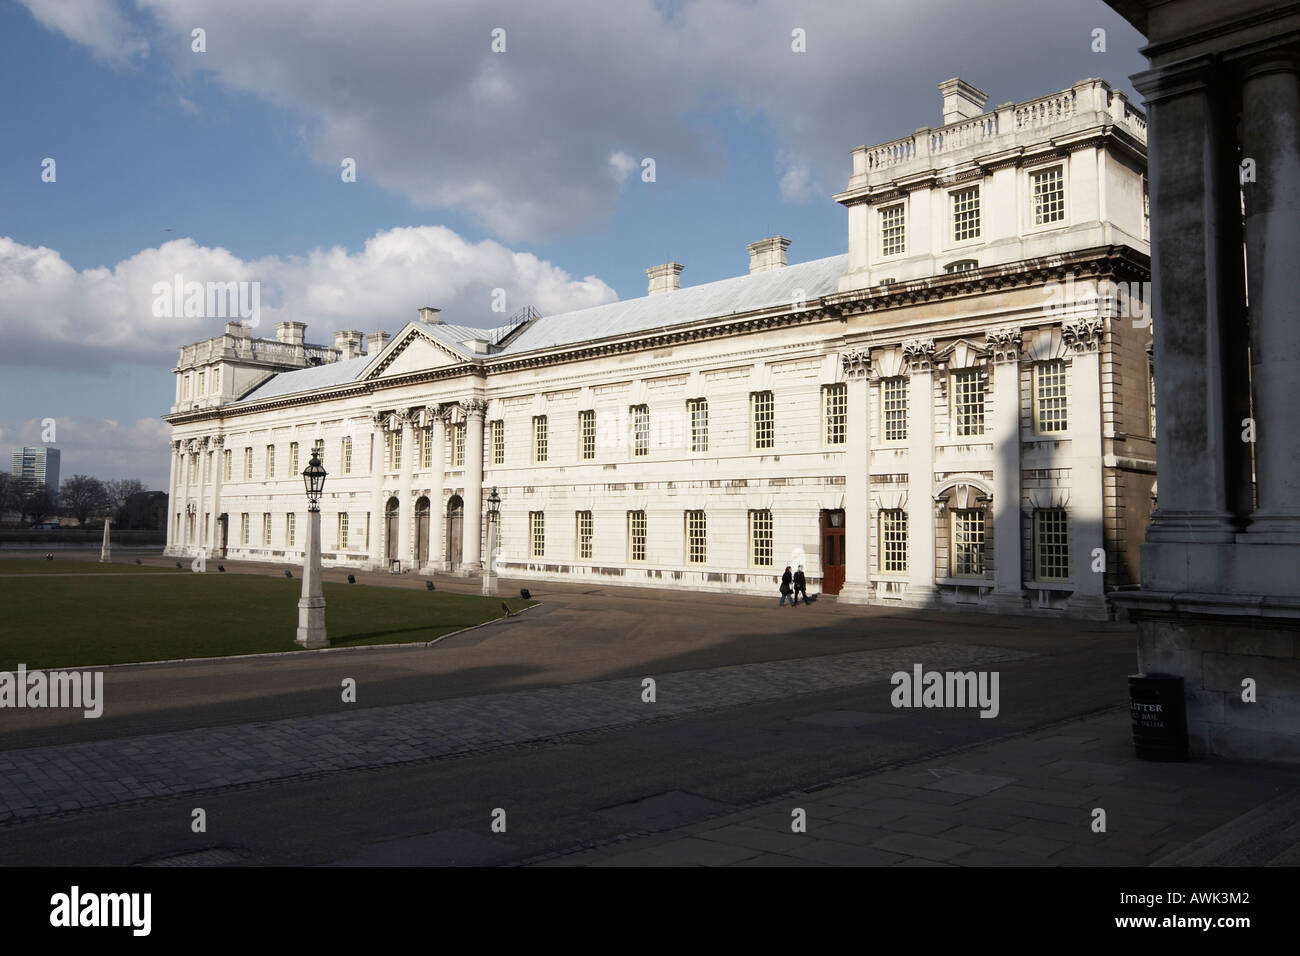 Queen Anne Court in Royal Naval College designed by Sir Christopher ...